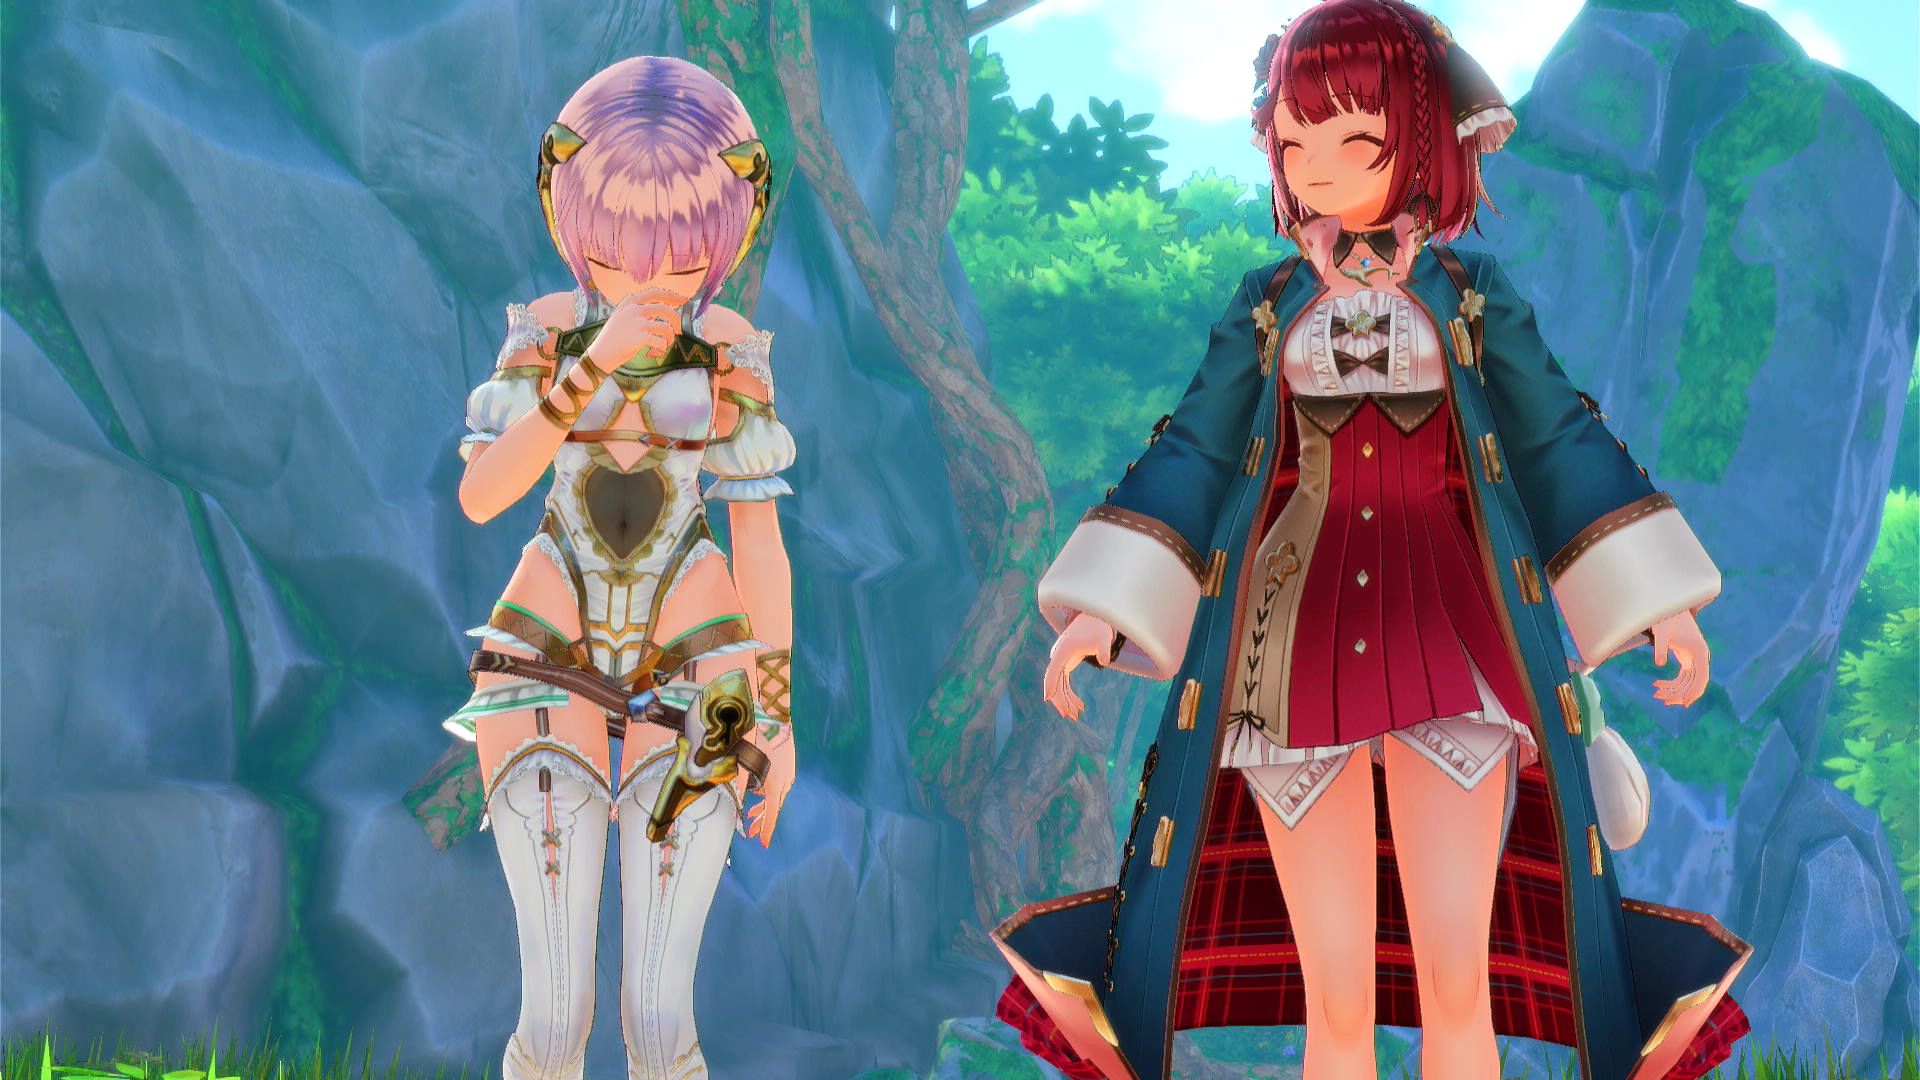 Atelier Sophie 2: The Alchemist of the Mysterious Dream - Recensione